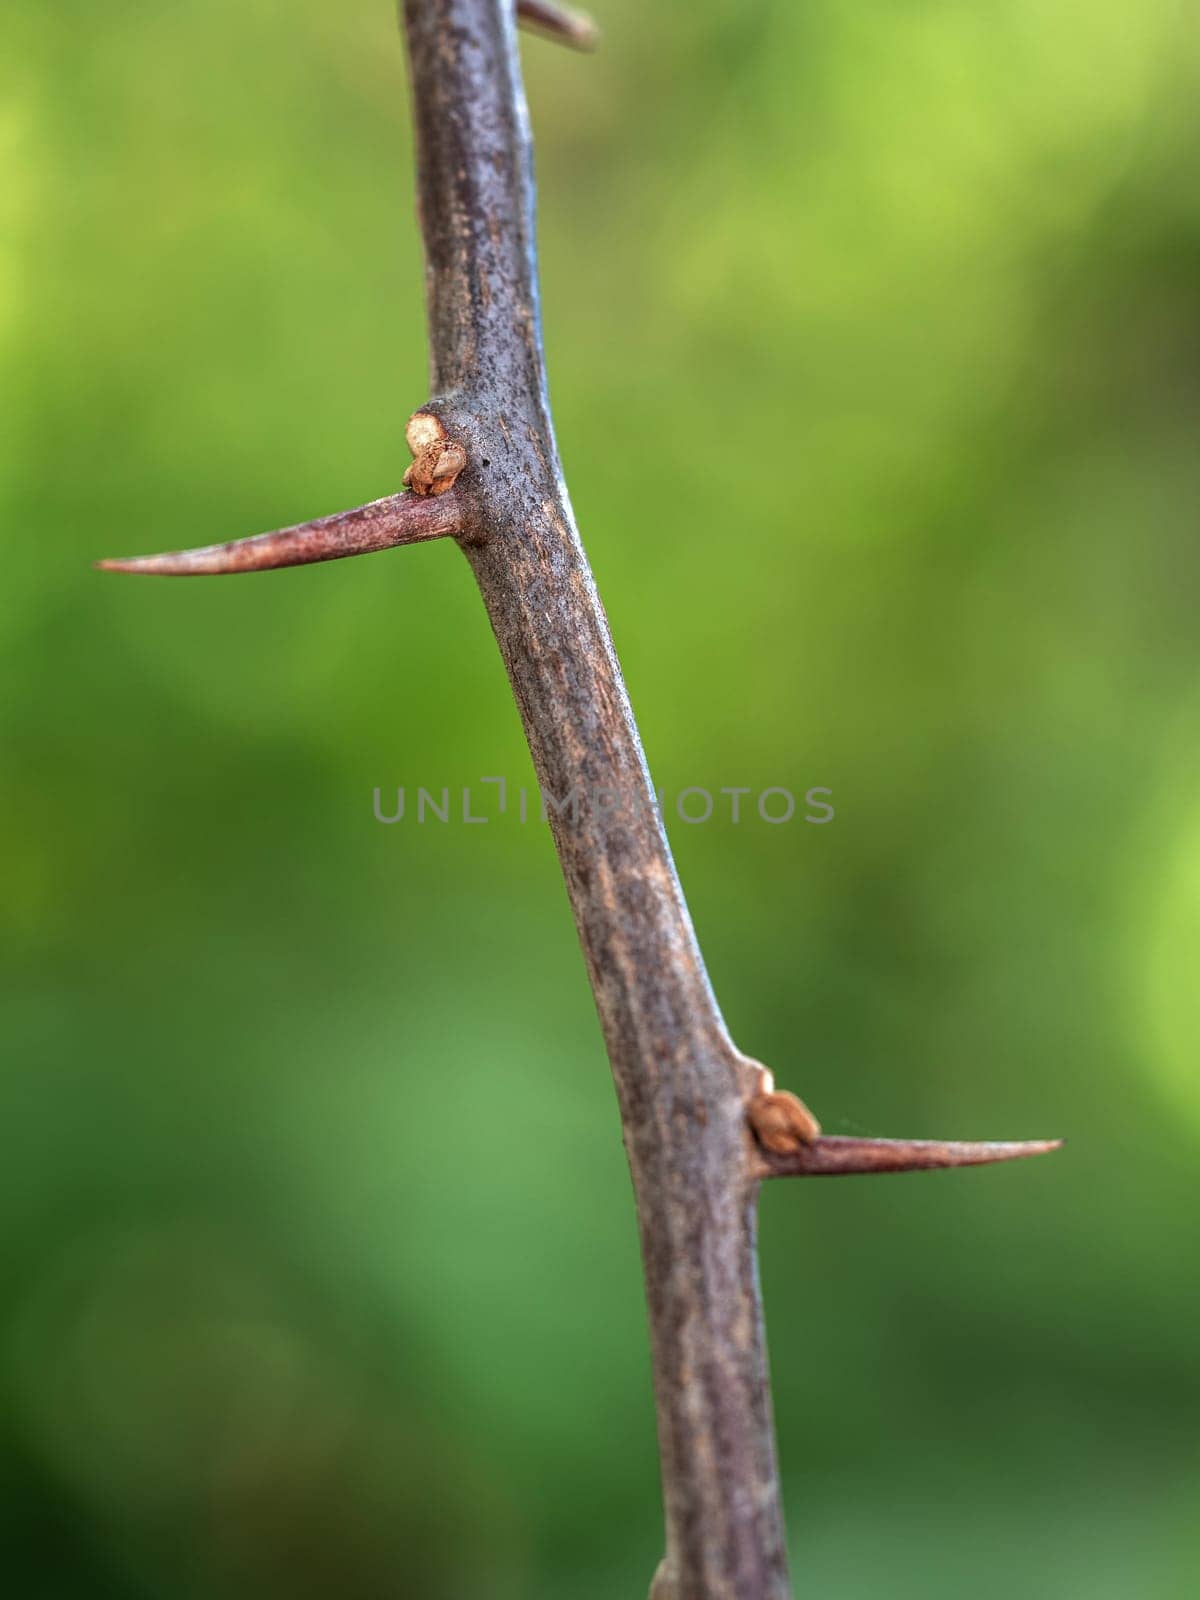 Sharp thorns on the Paper flower branches